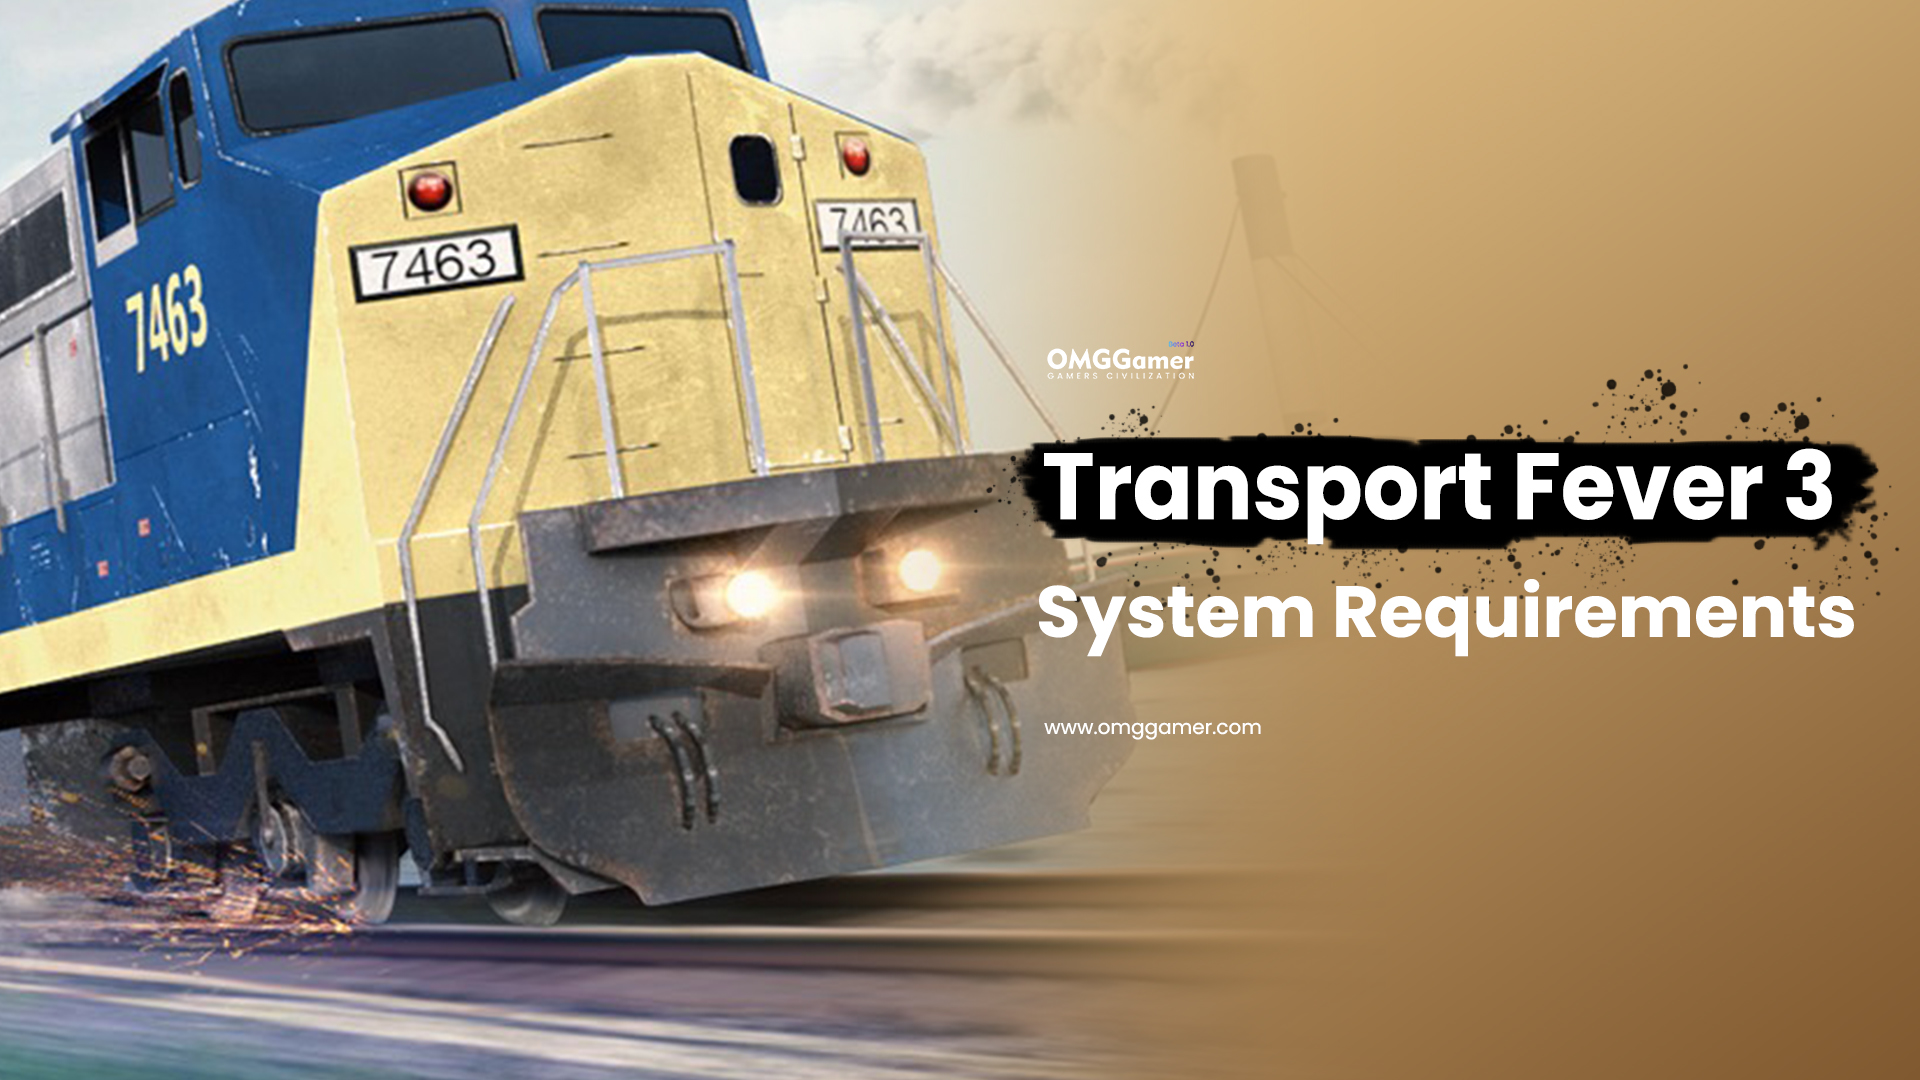 Transport Fever 3 System Requirements